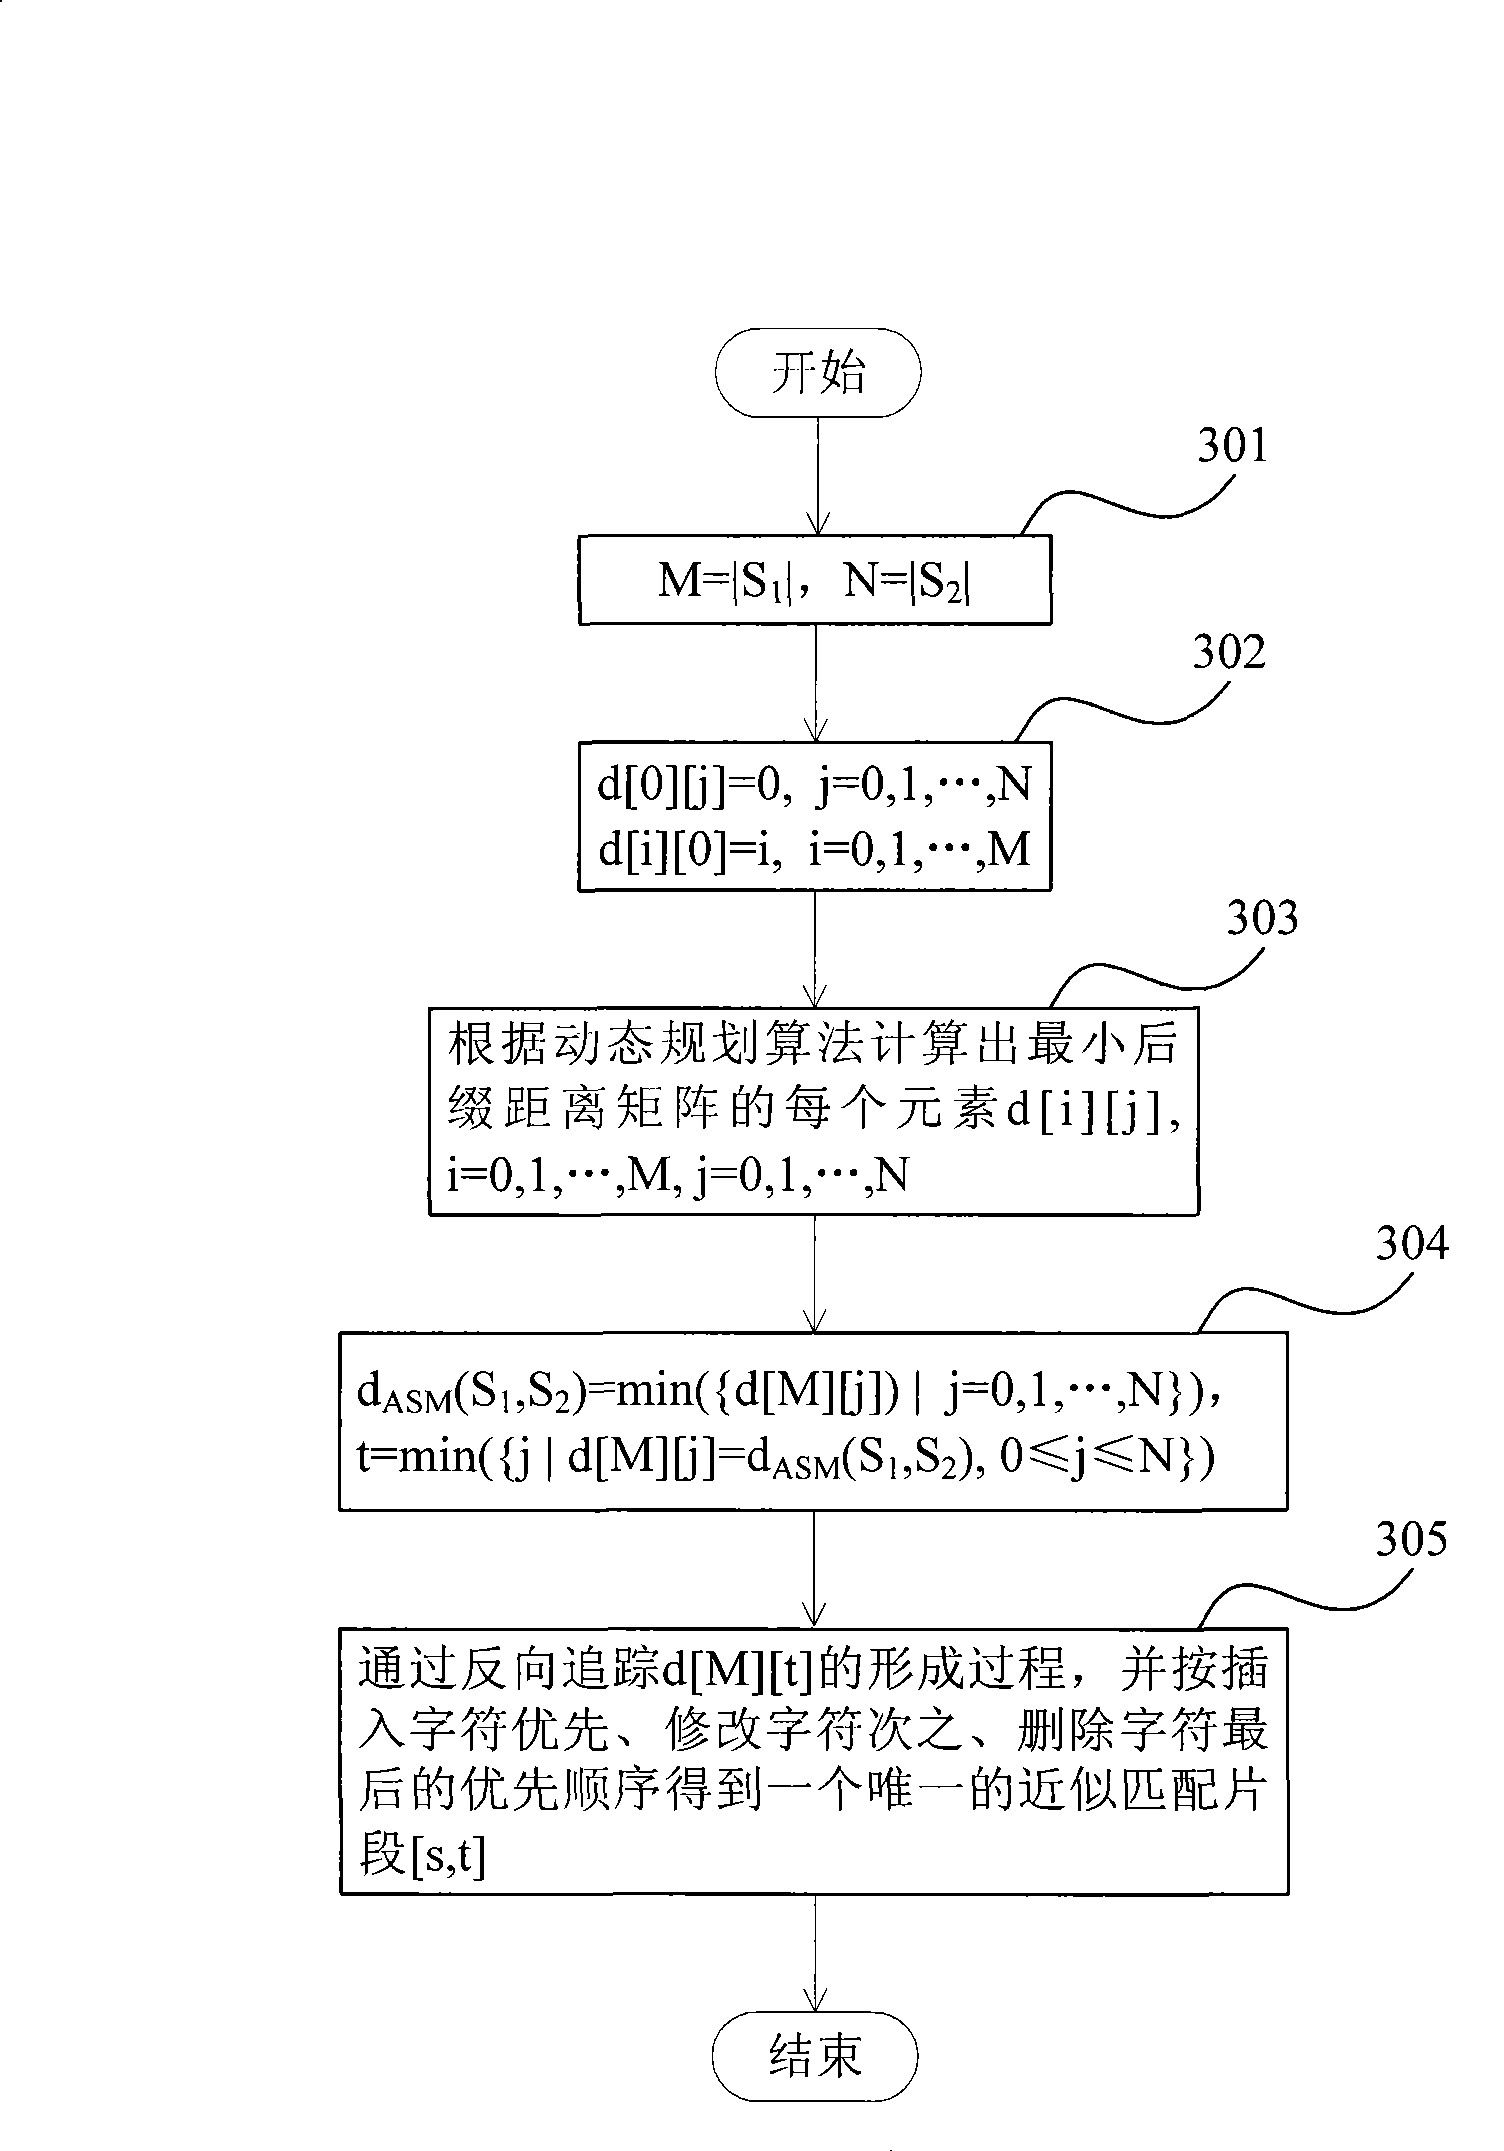 Electronic text document plagiarism recognition method based on similar string matching distance